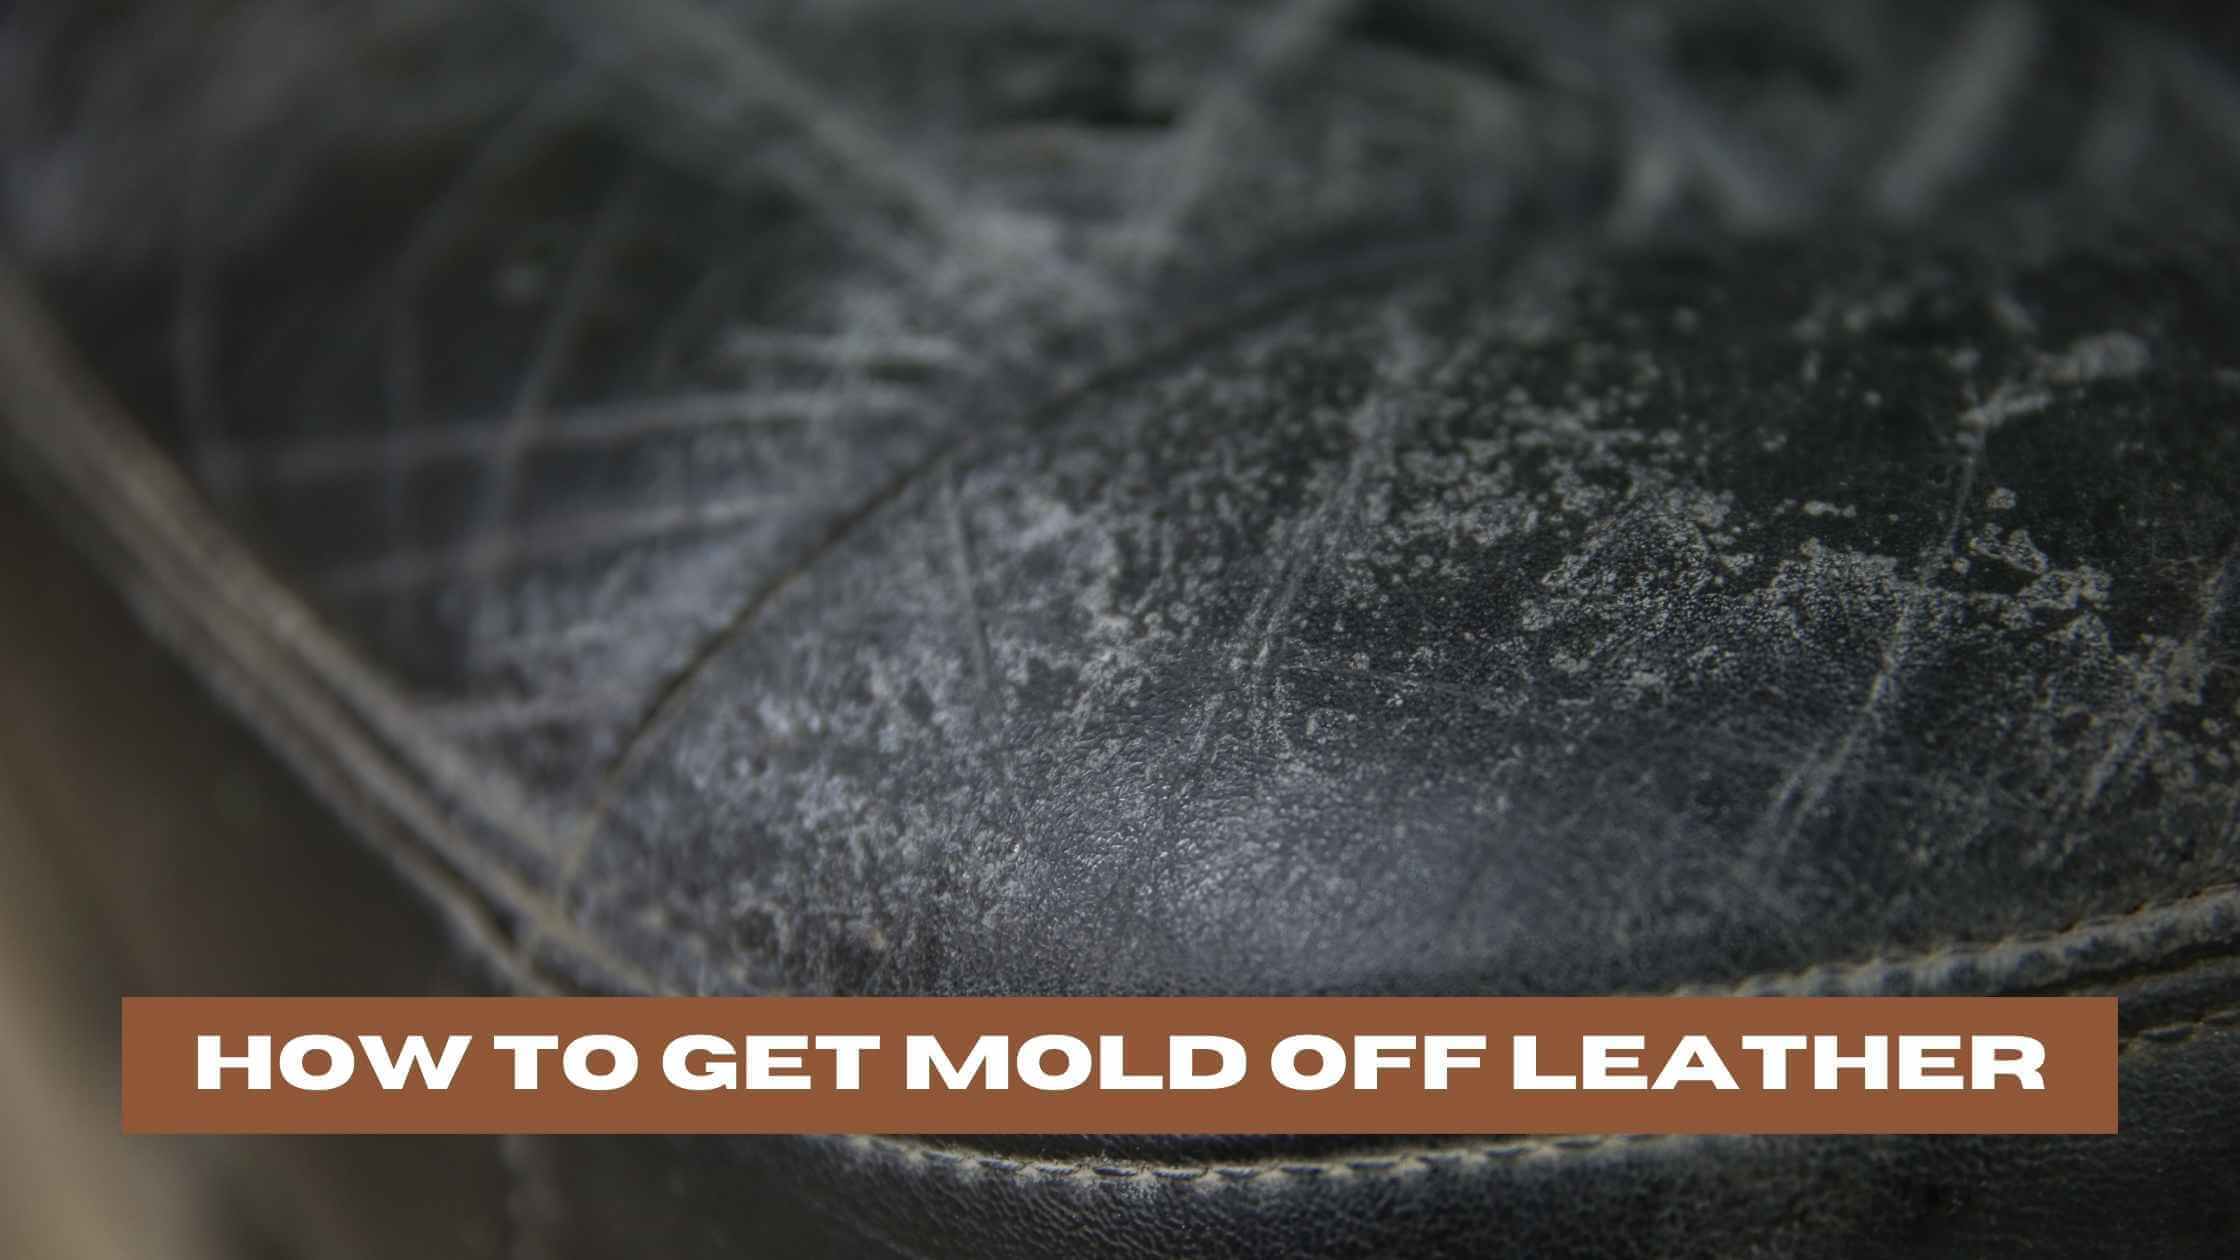 How To Get Mold Off Leather